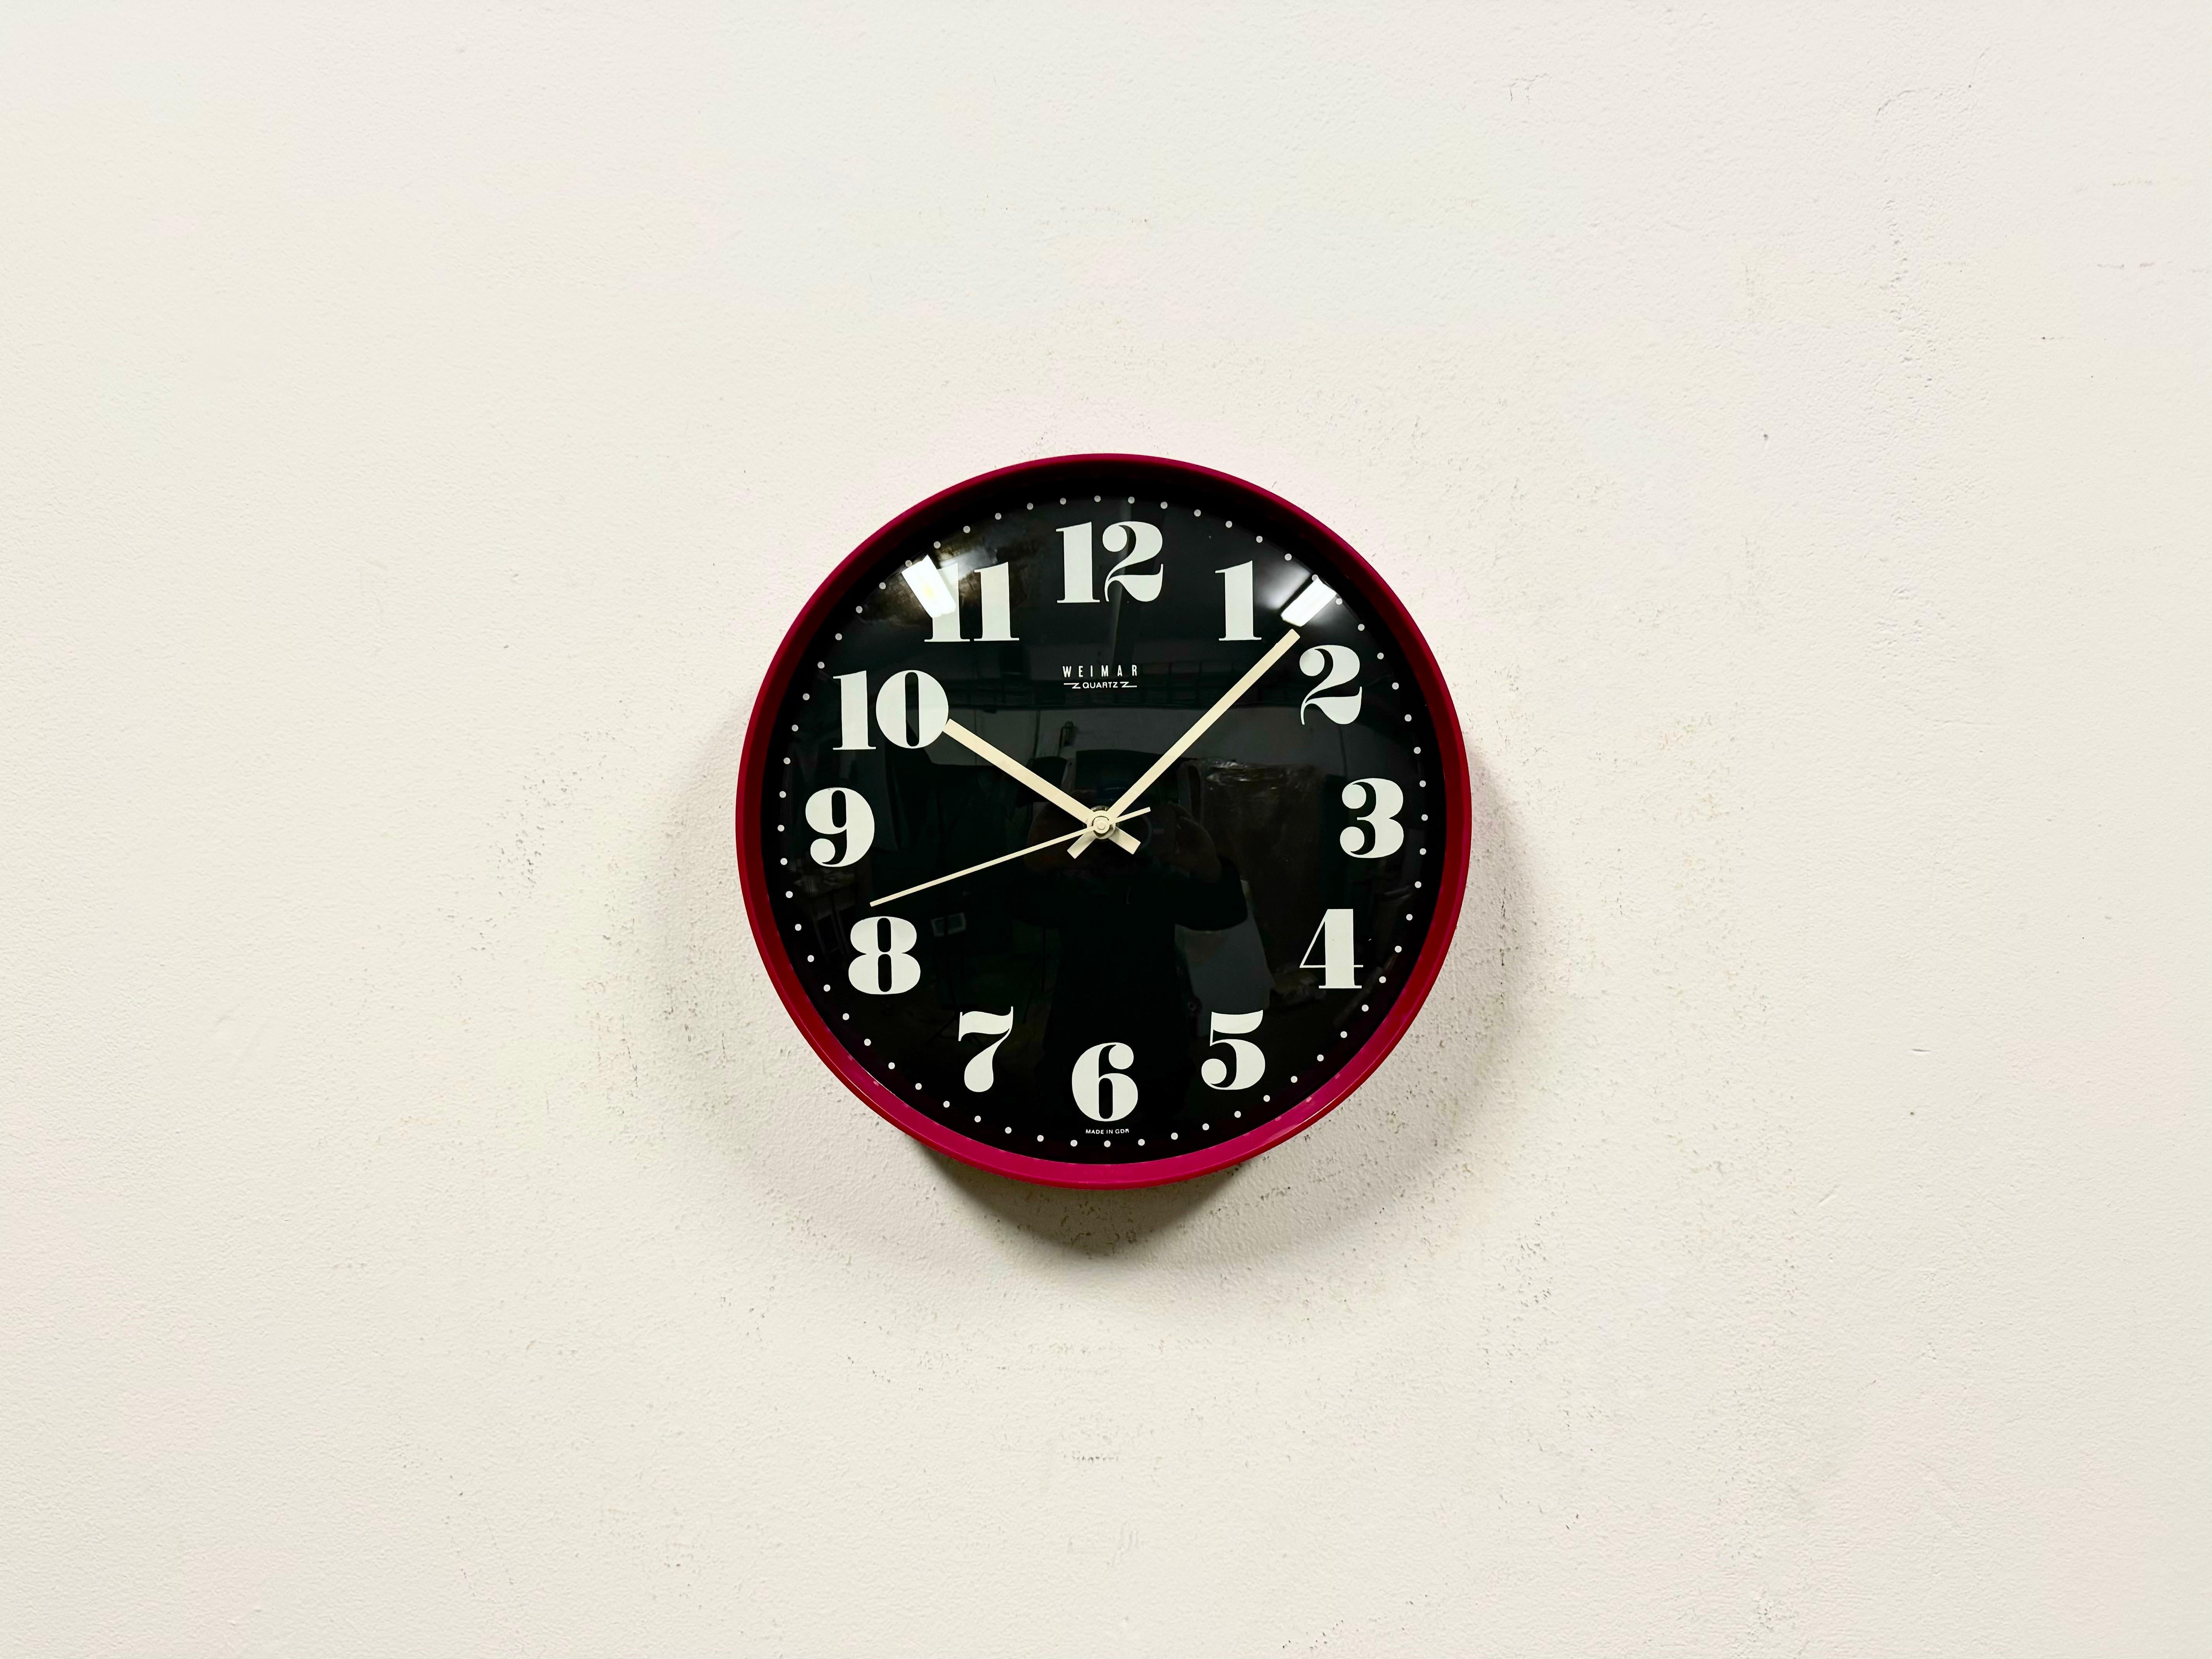 Vintage industrial wall clock produced by Weimar Quartz in former East Germany during the 1980s. It features a pink bakelite frame,a black metal dial, an aluminium hands and a curved clear glass cover. The original battery-powered clockwork requires